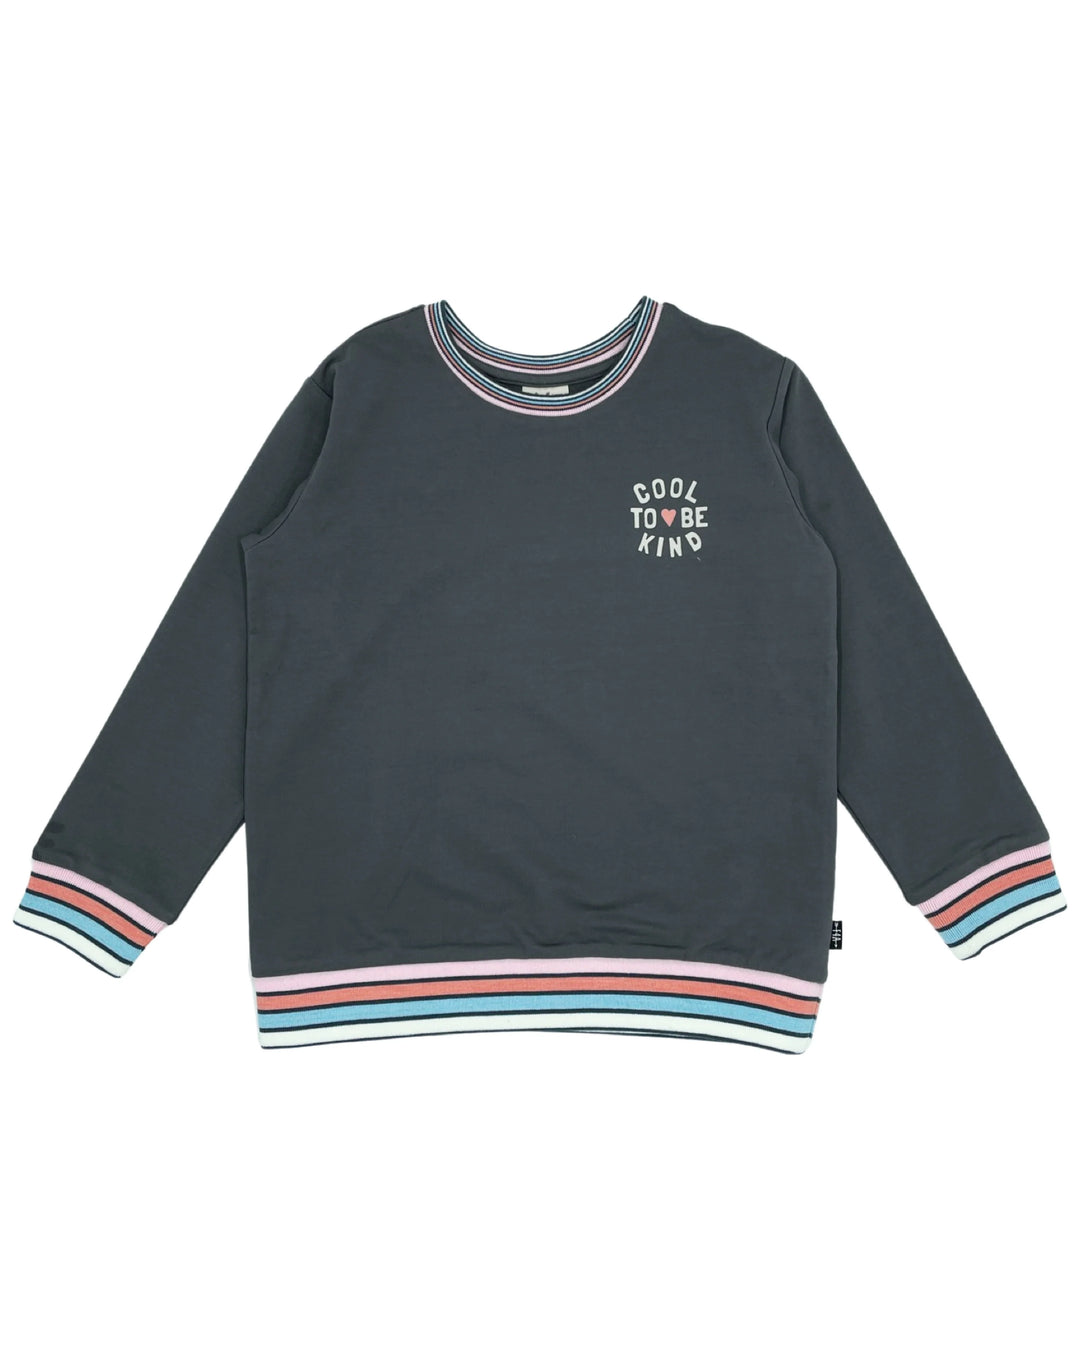 The Girls Cool To Be Kind Pullover